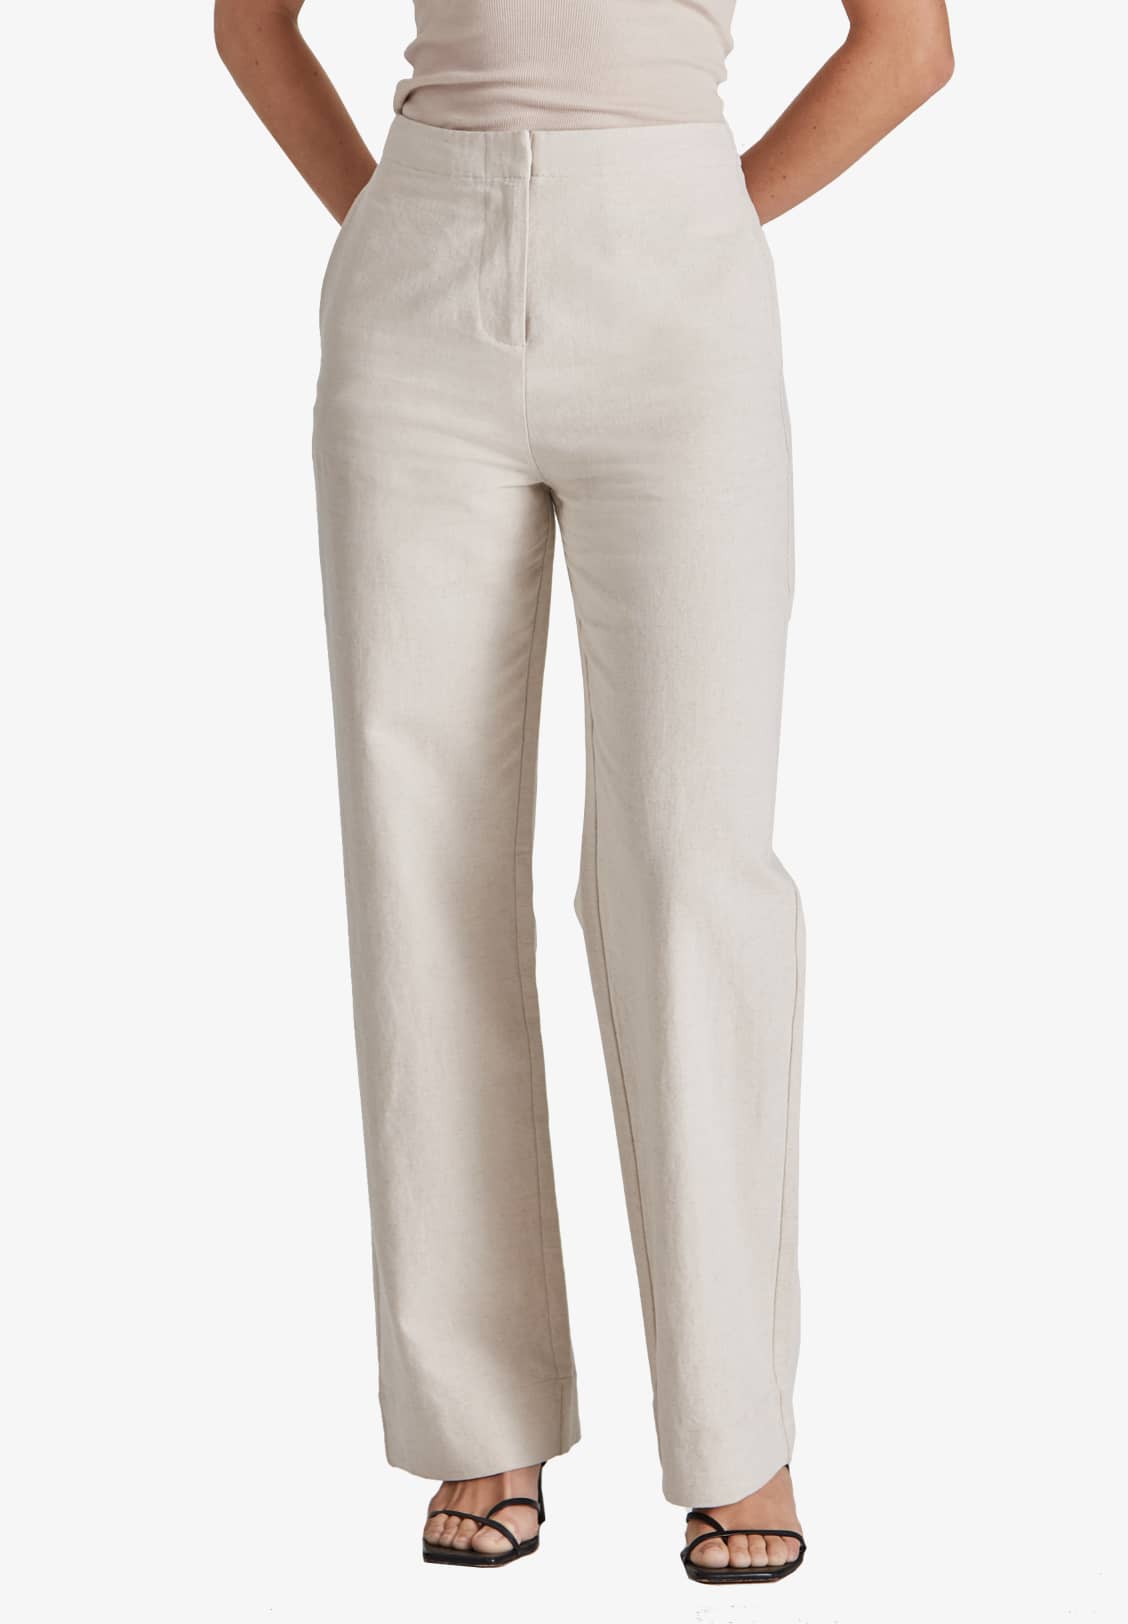 COMMONERS TAILORED RELAXED LEG PANT - NATURAL  The Commoners Tailored Relaxed Leg Pant in Natural have been designed as a set to wear with the Commoners Linen Blend Utility Shacket.   This flattering pant have tailored upper darting at the rear and a lose straight leg 